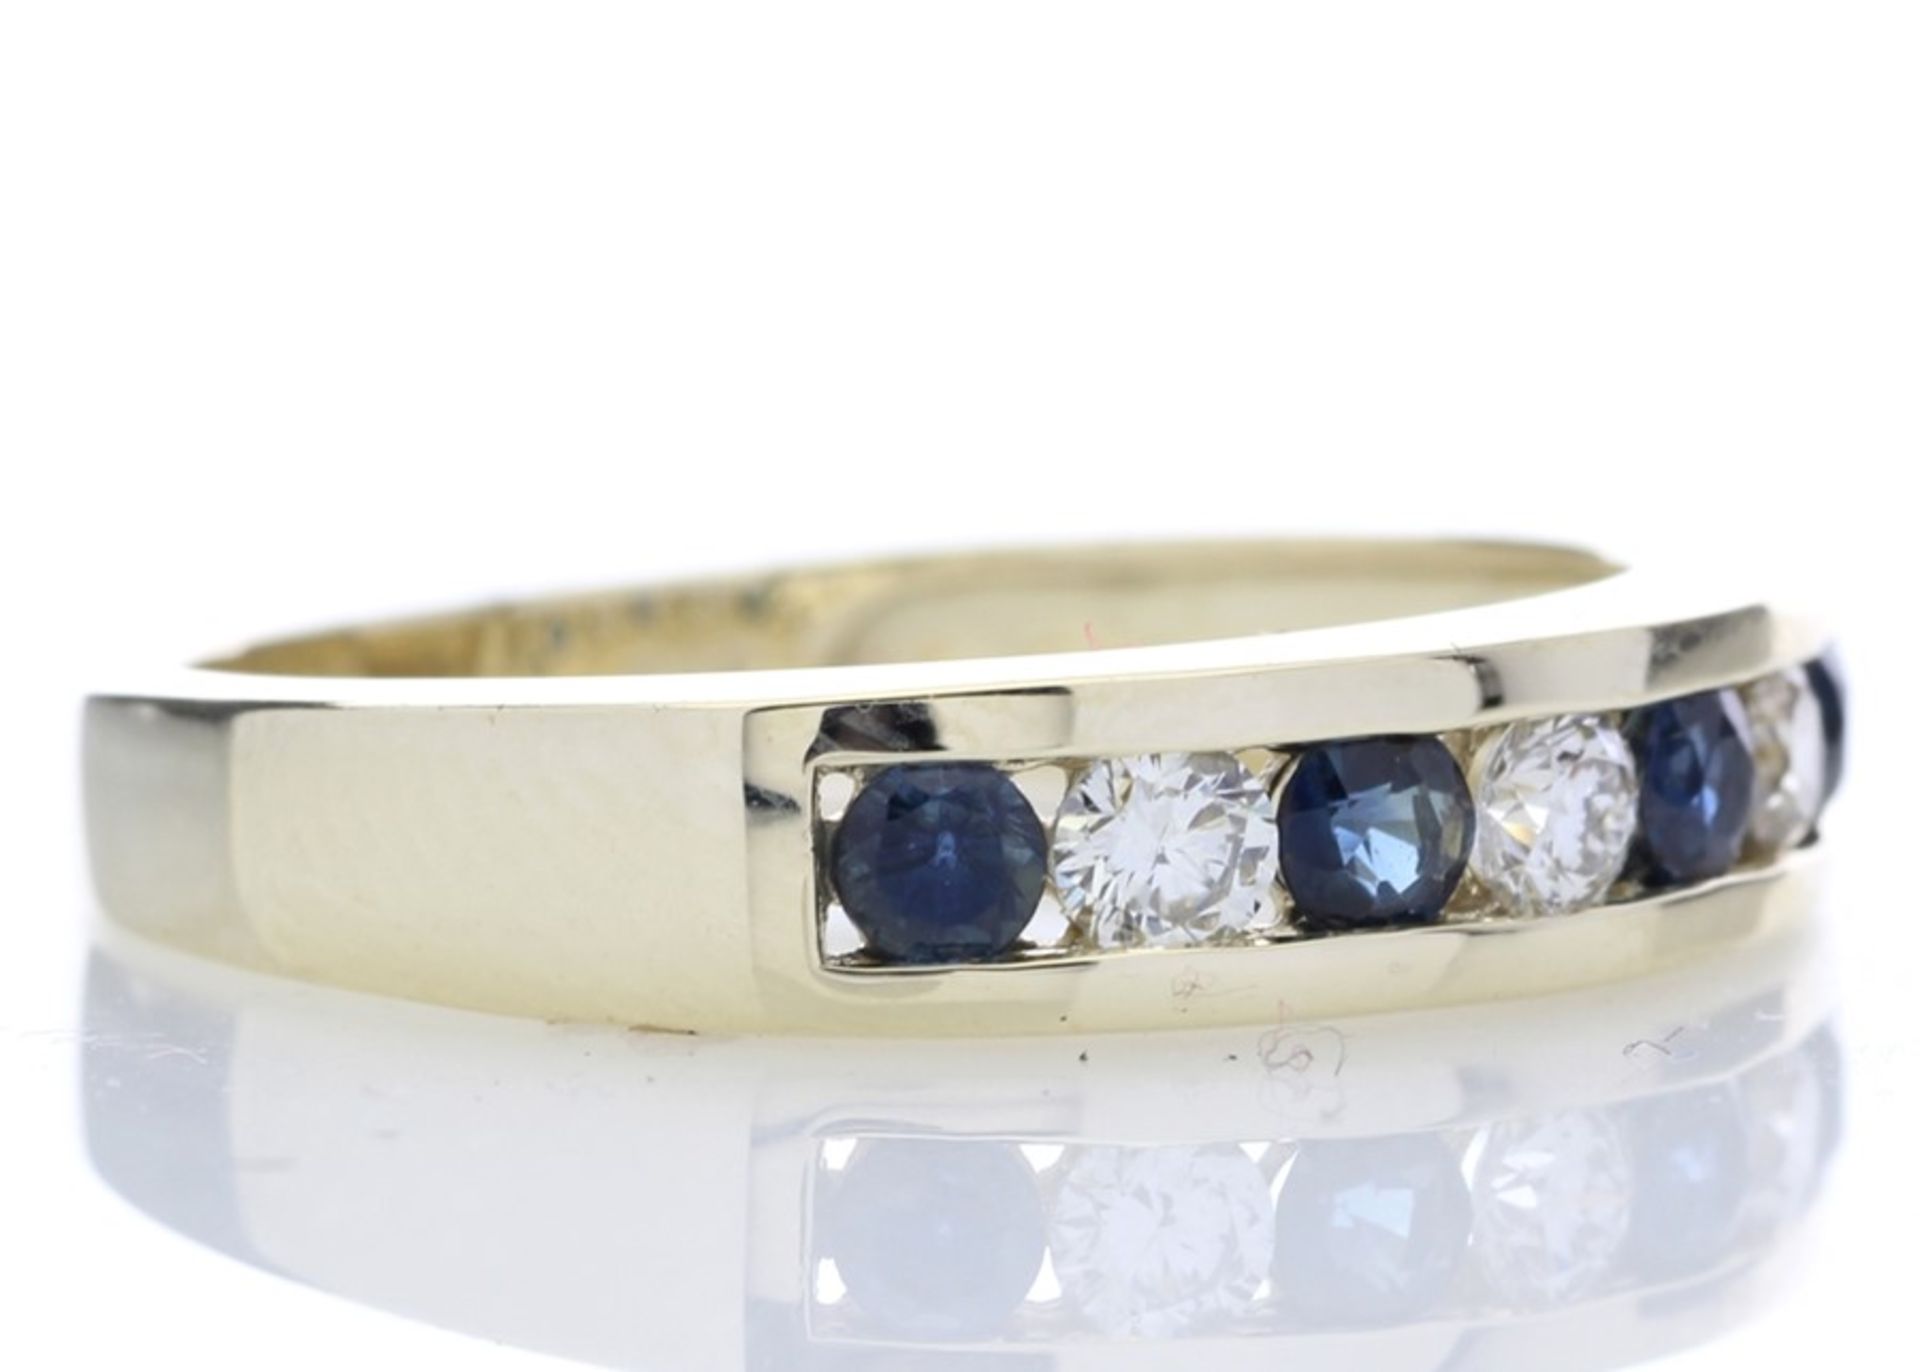 Valued by GIE £2,945.00 - 9ct Yellow Gold Channel Set Semi Eternity Diamond Ring 0.25 (Sapphire) - Image 4 of 5